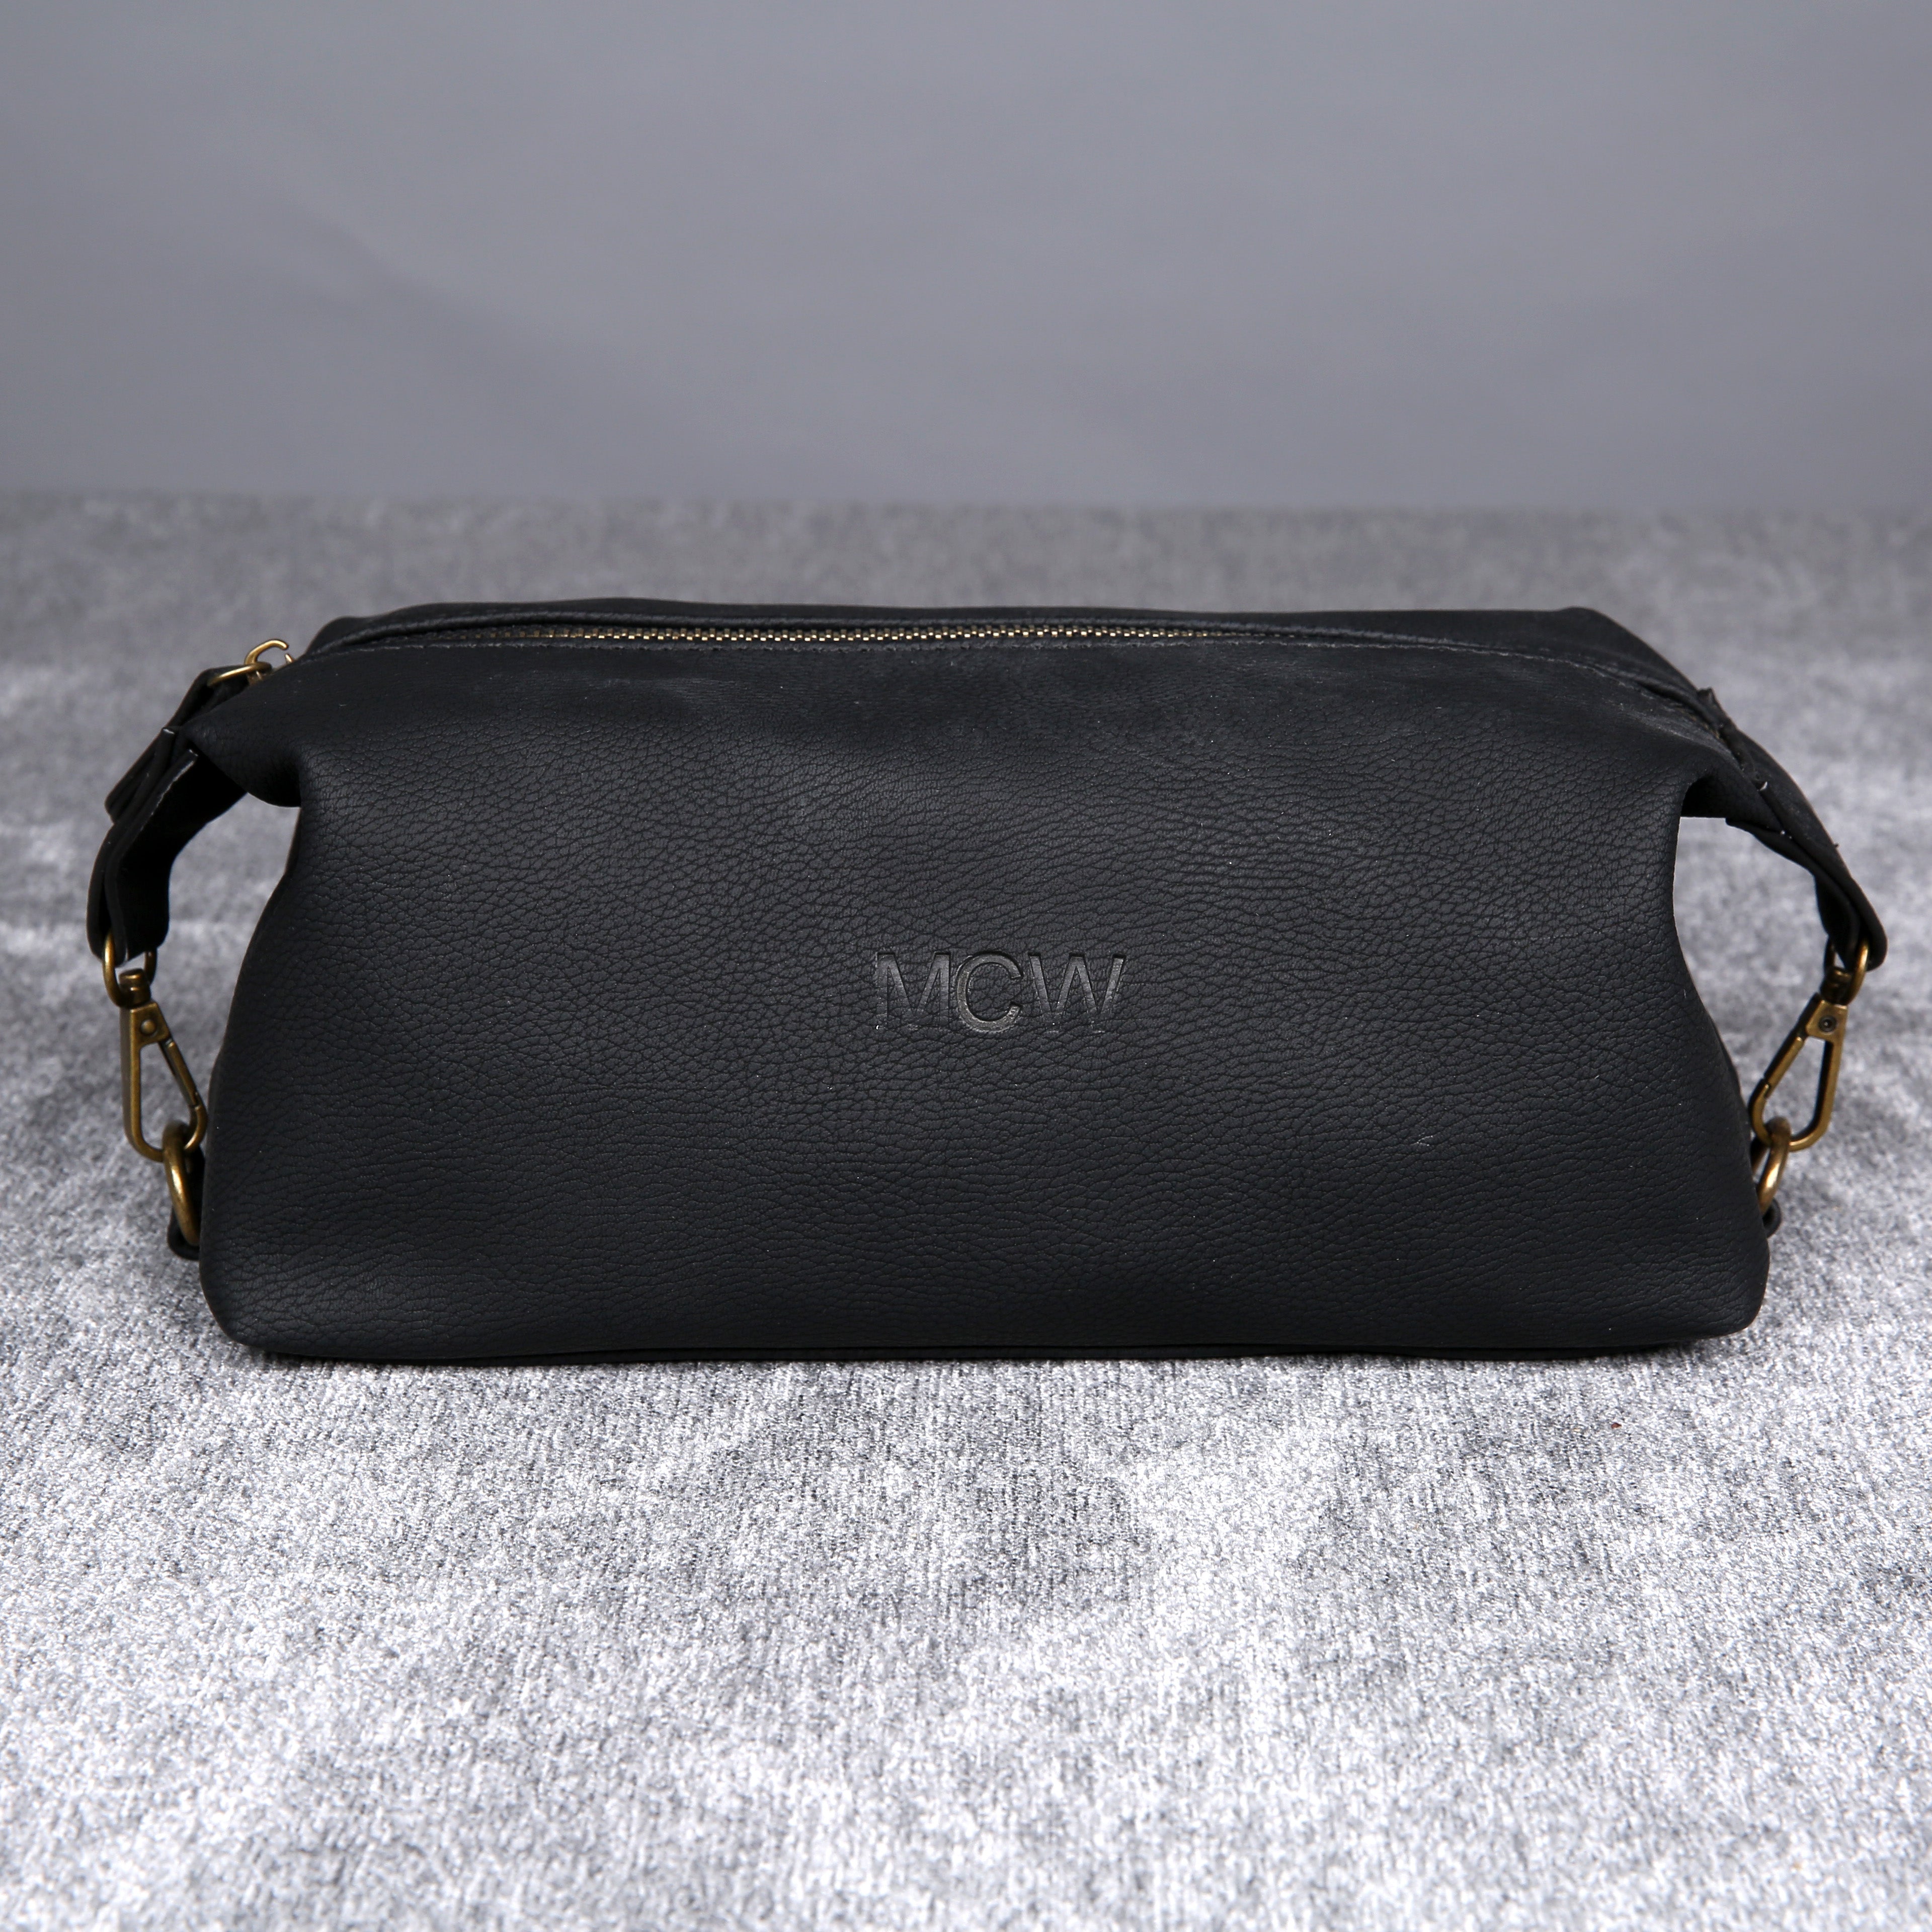 Personalized White Vegan Leather Cosmetic Bag